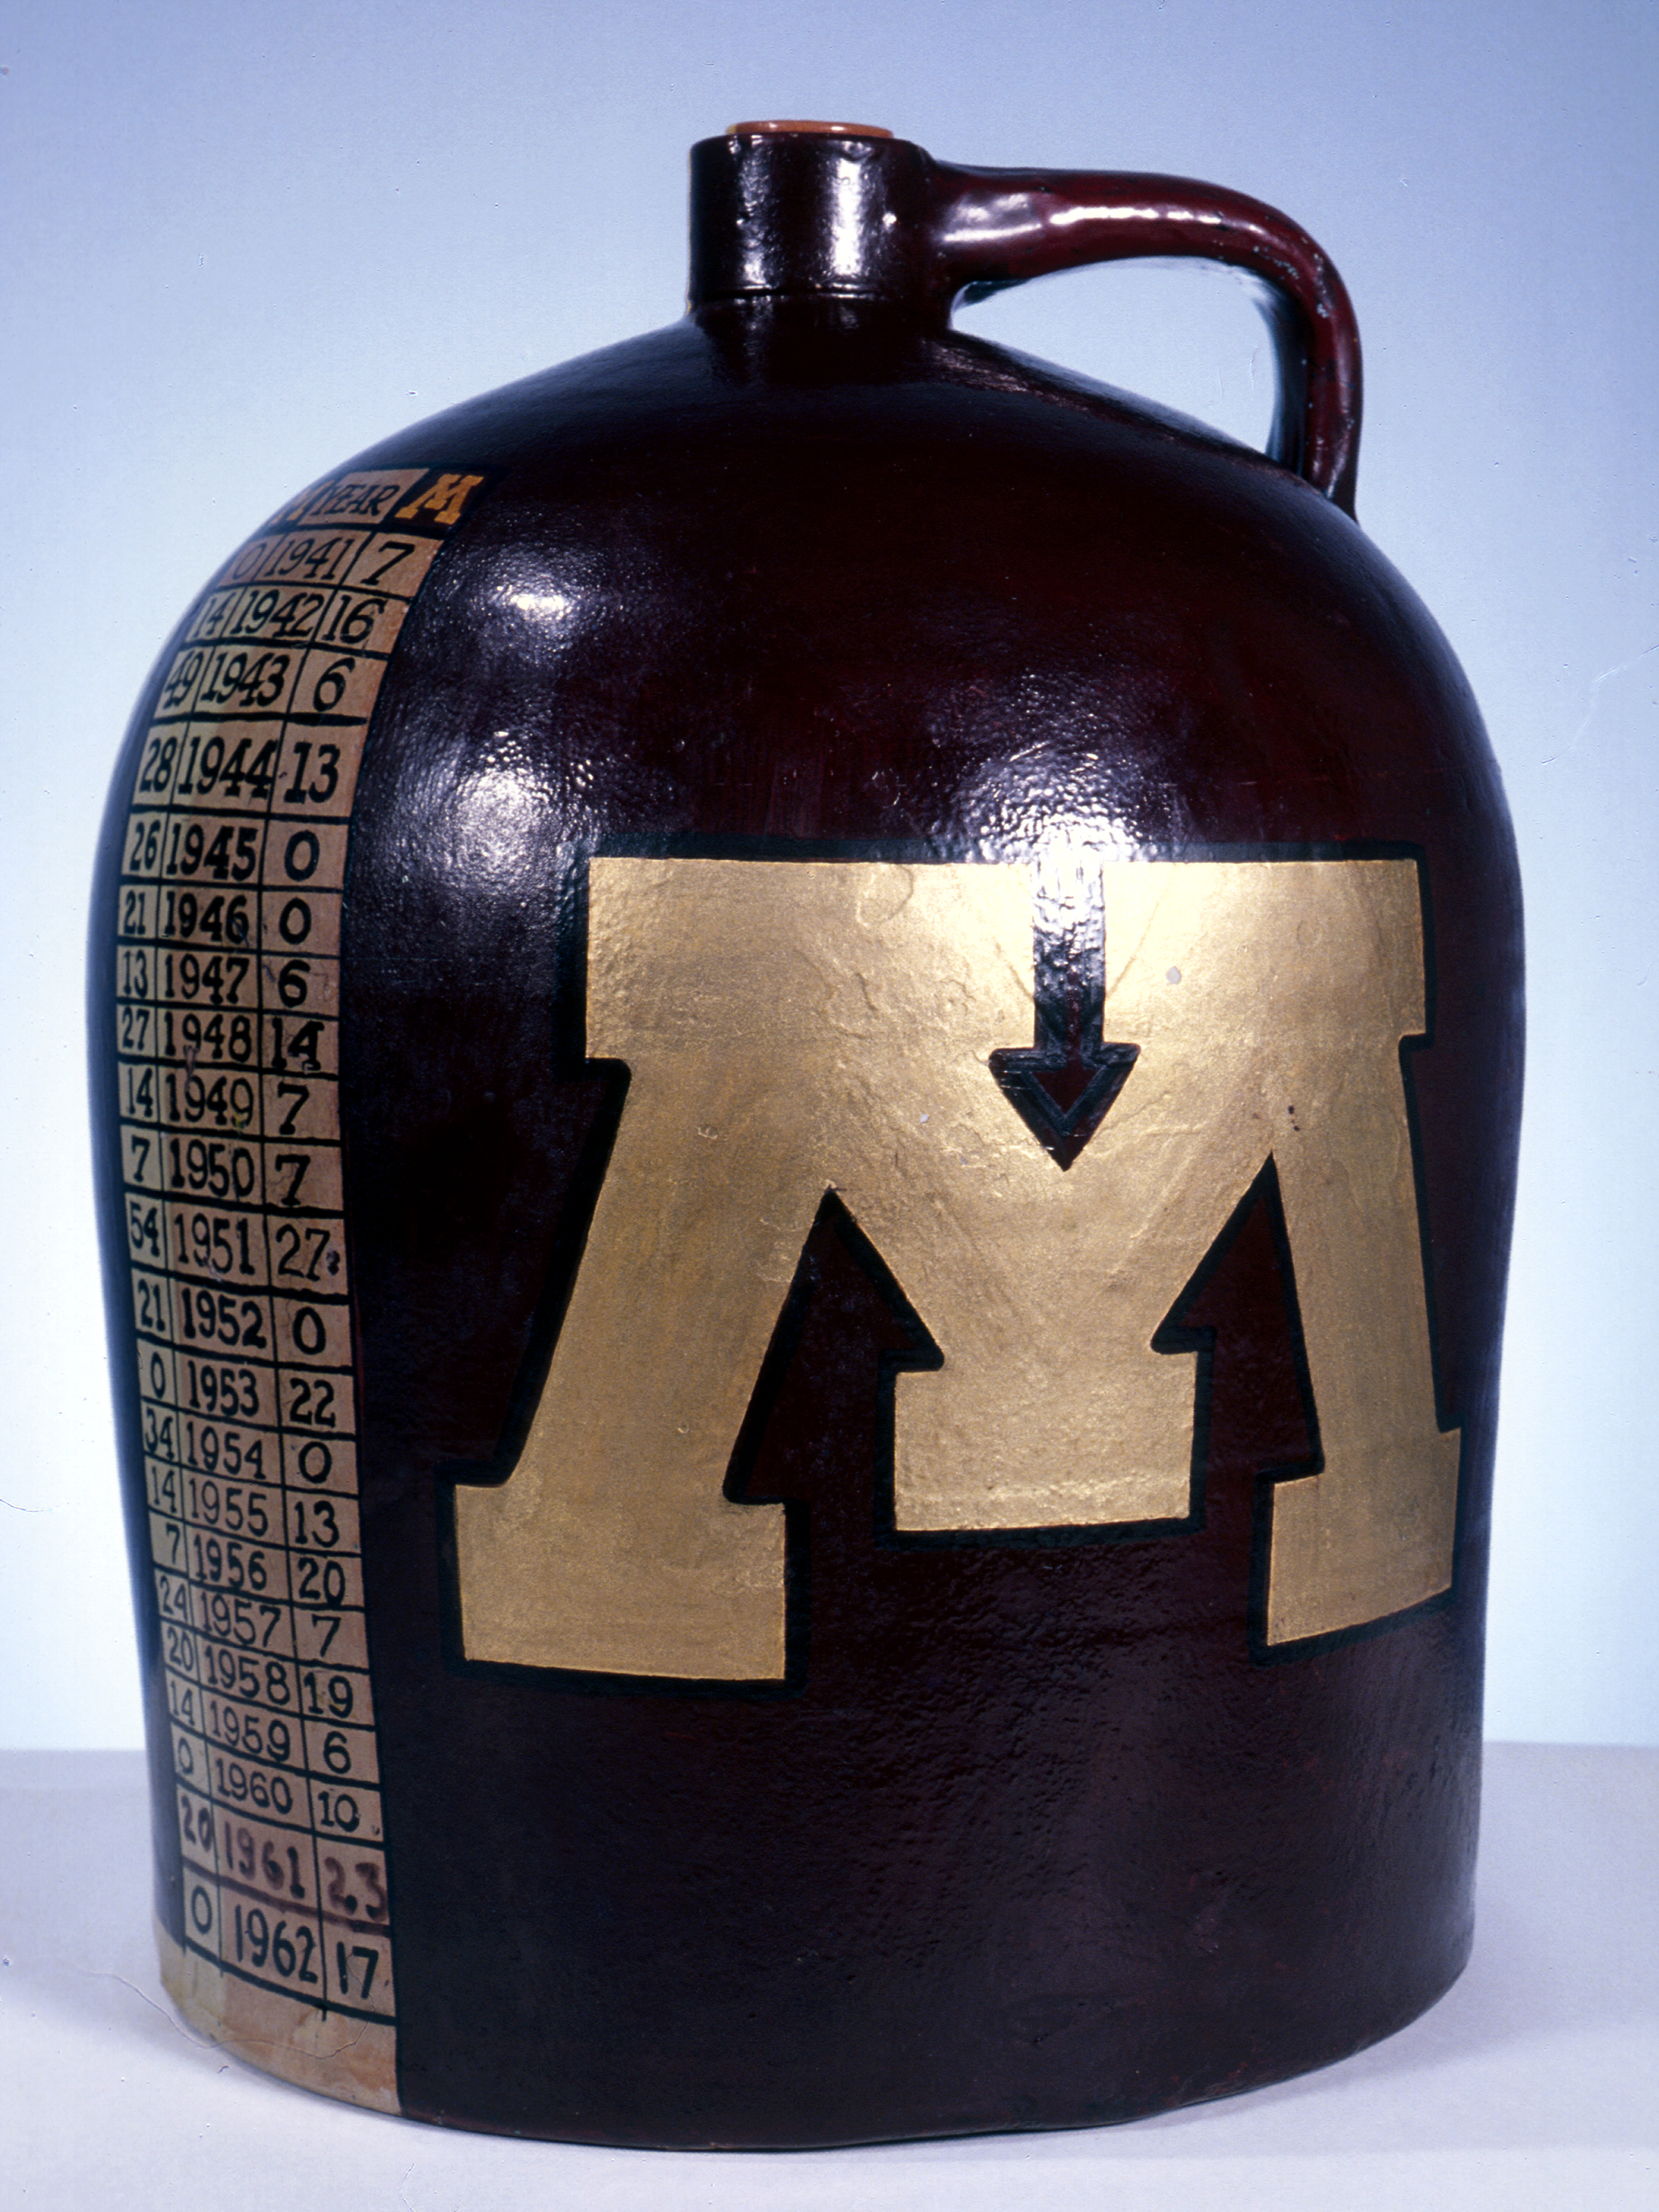 College football rivalries give birth to some of the funkiest trophies